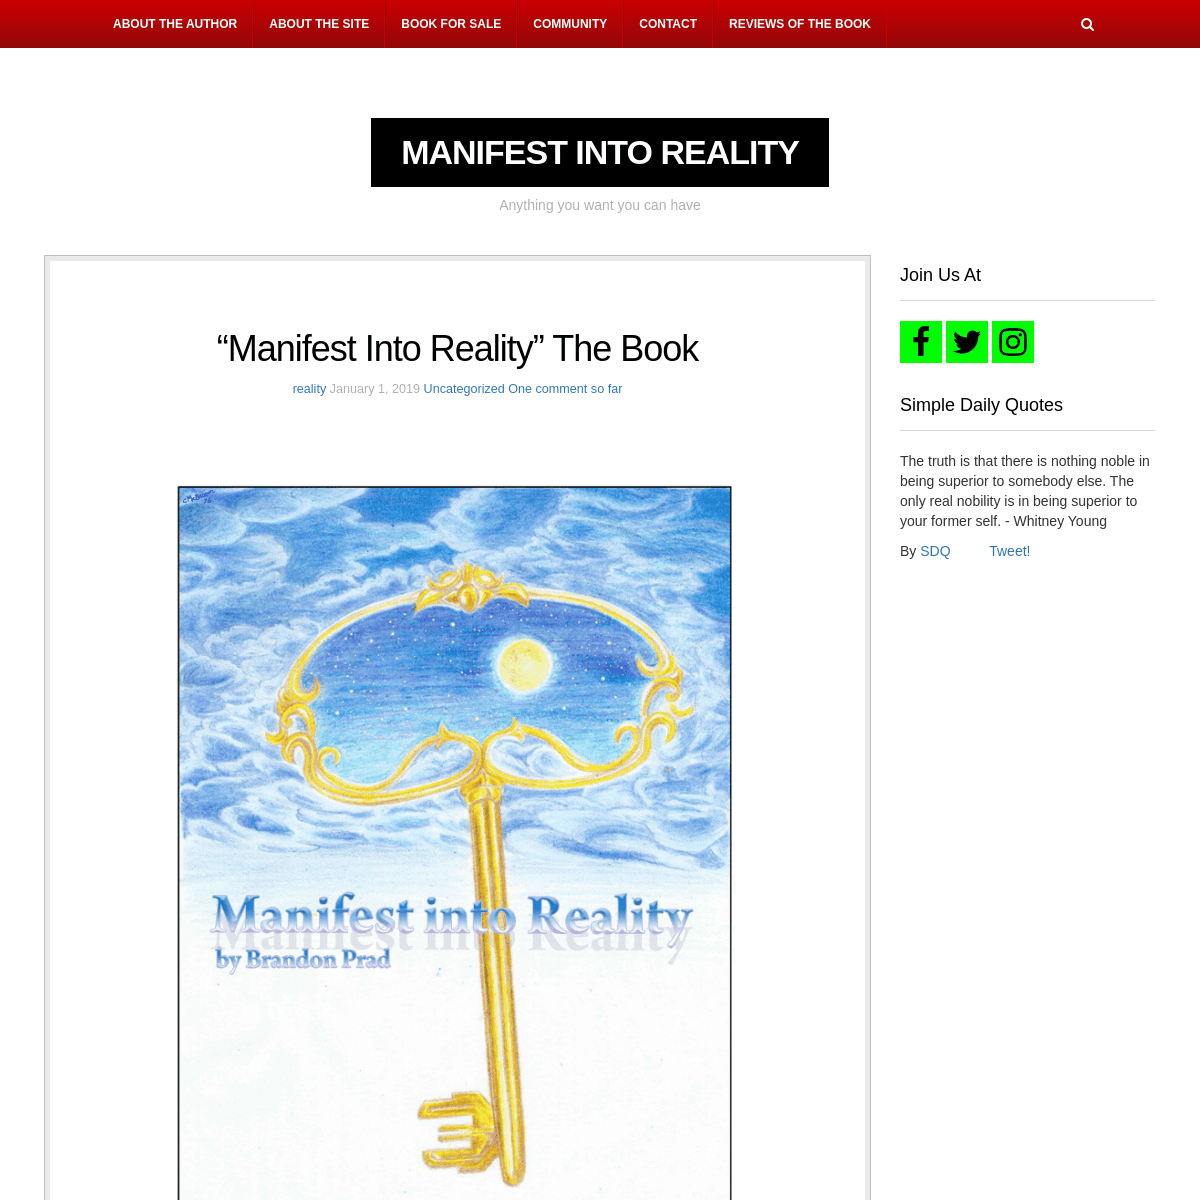 A complete backup of https://manifestintoreality.com